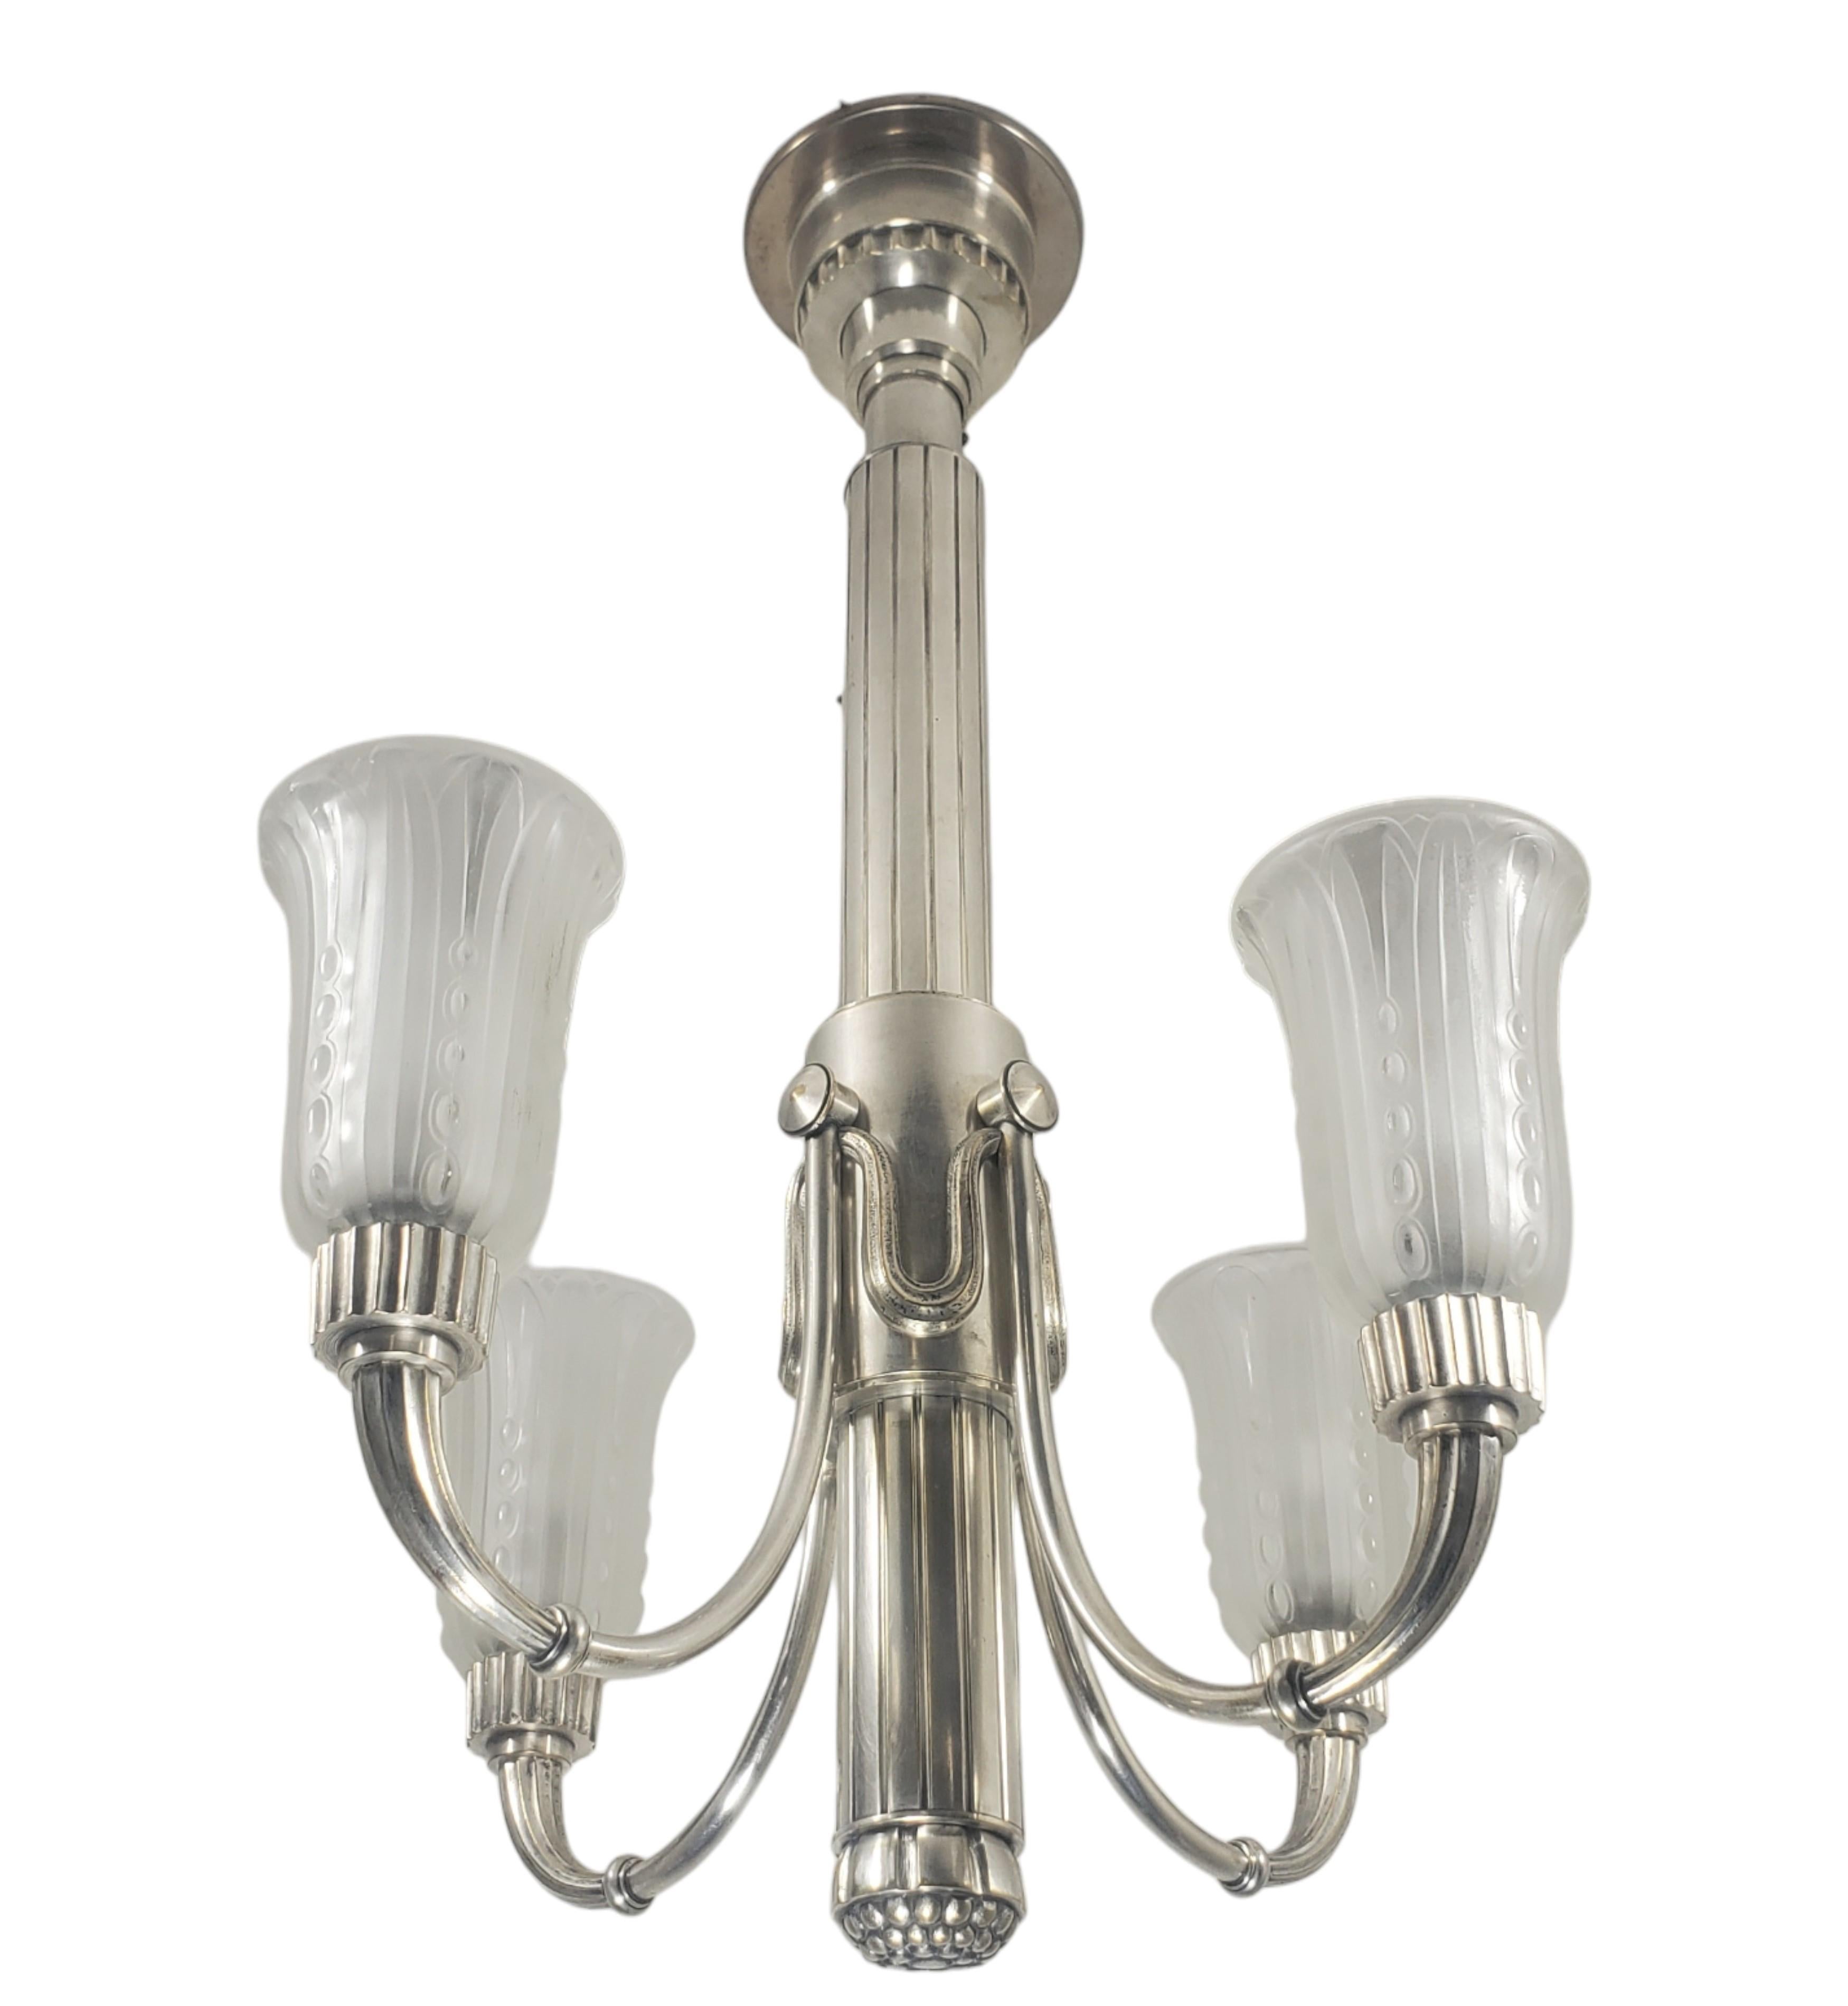 Original Leleu silvered bronze 4 arm chandelier w/ frosted art glass tulips For Sale 8